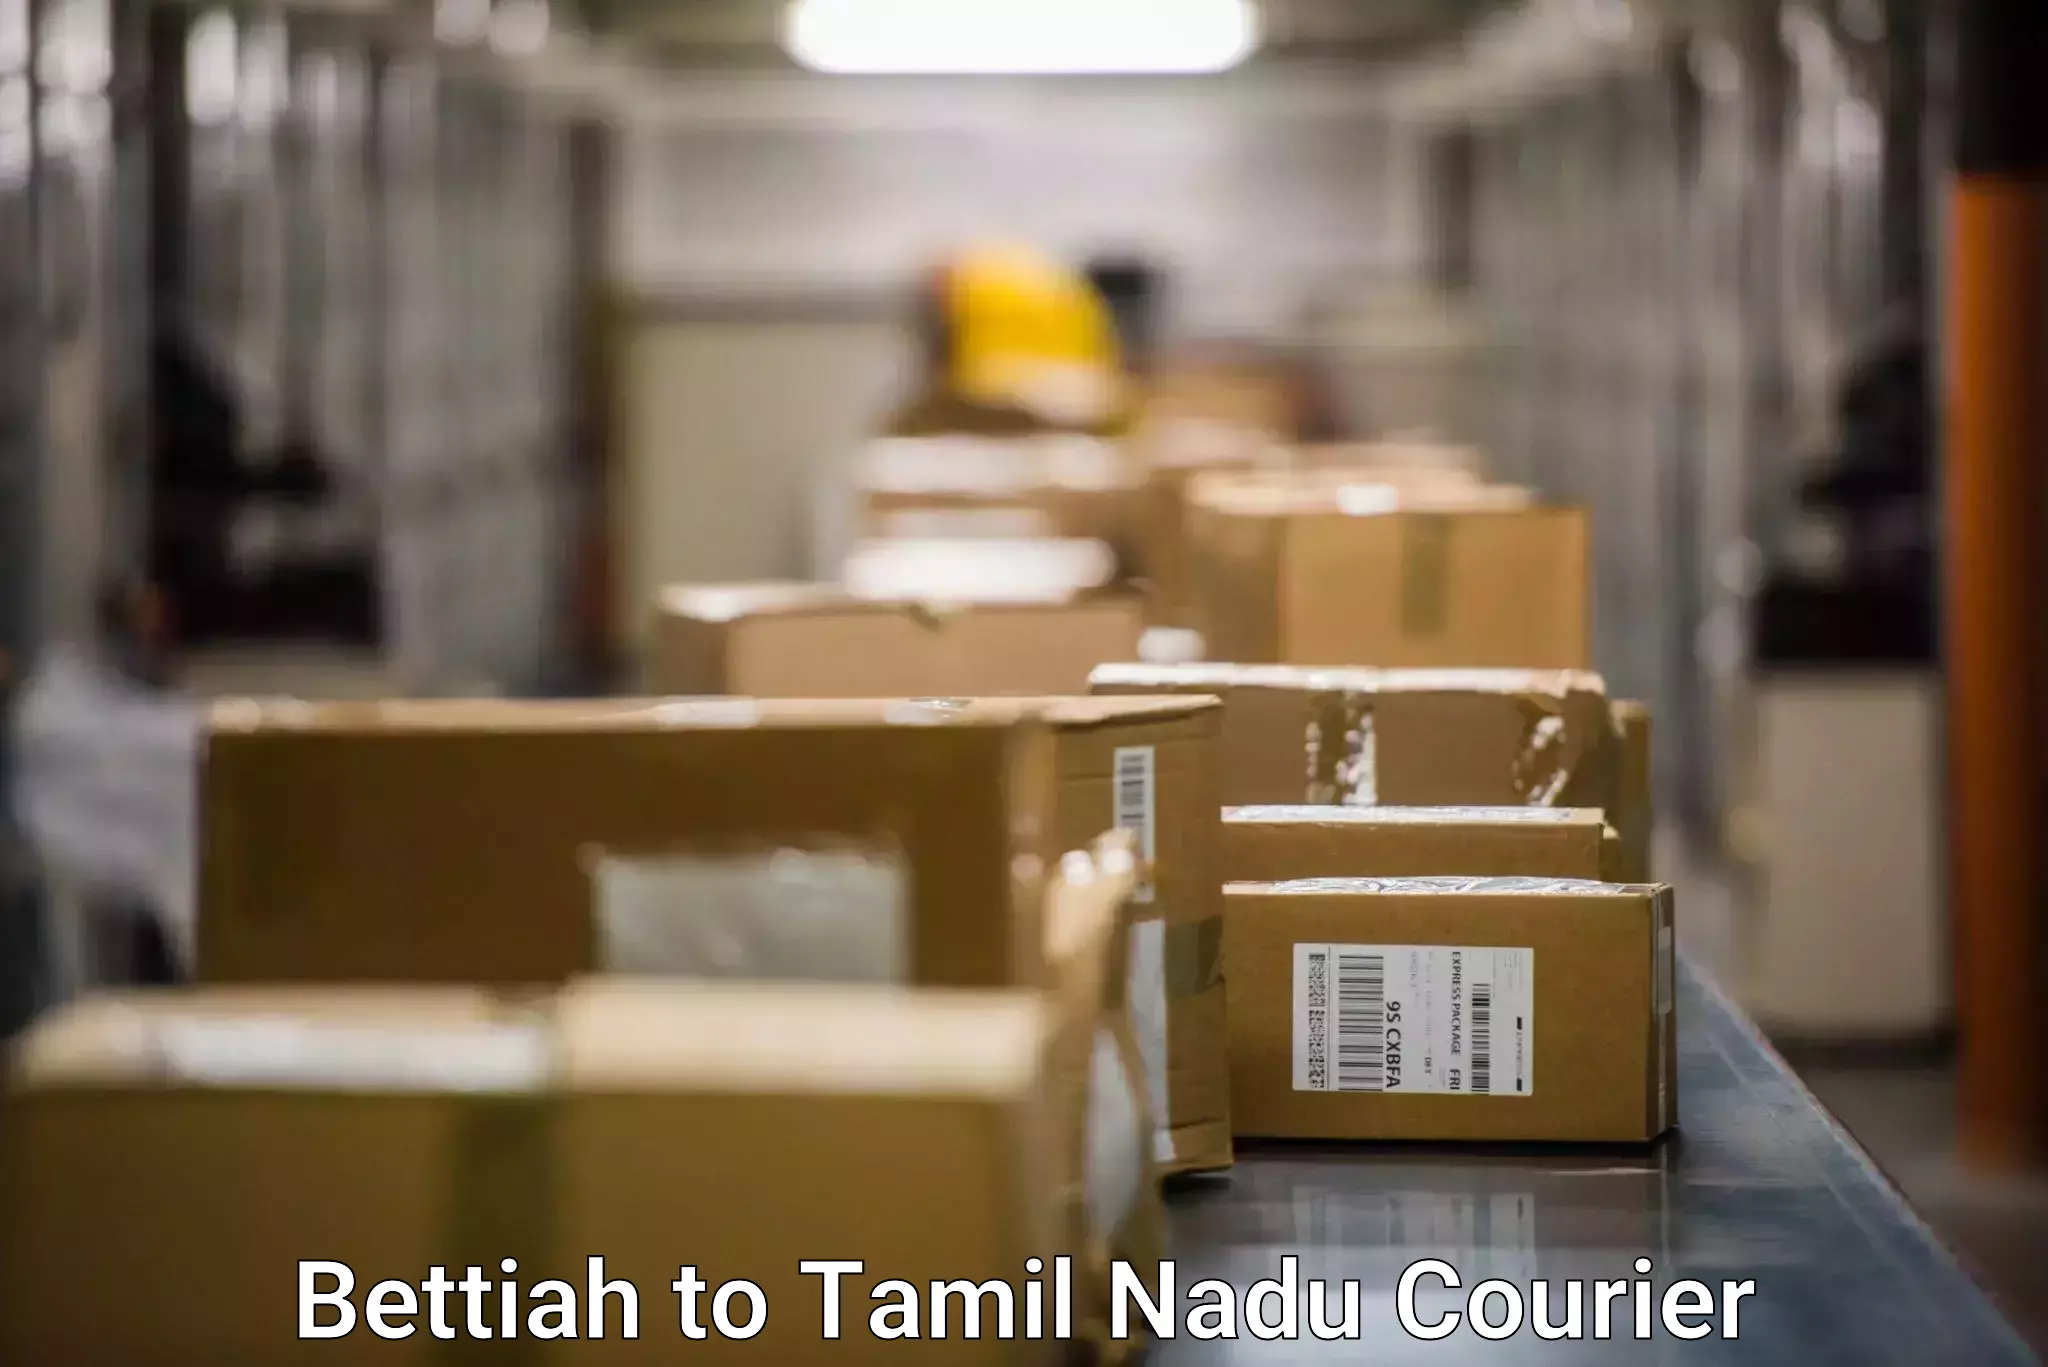 On-call courier service Bettiah to Tamil Nadu